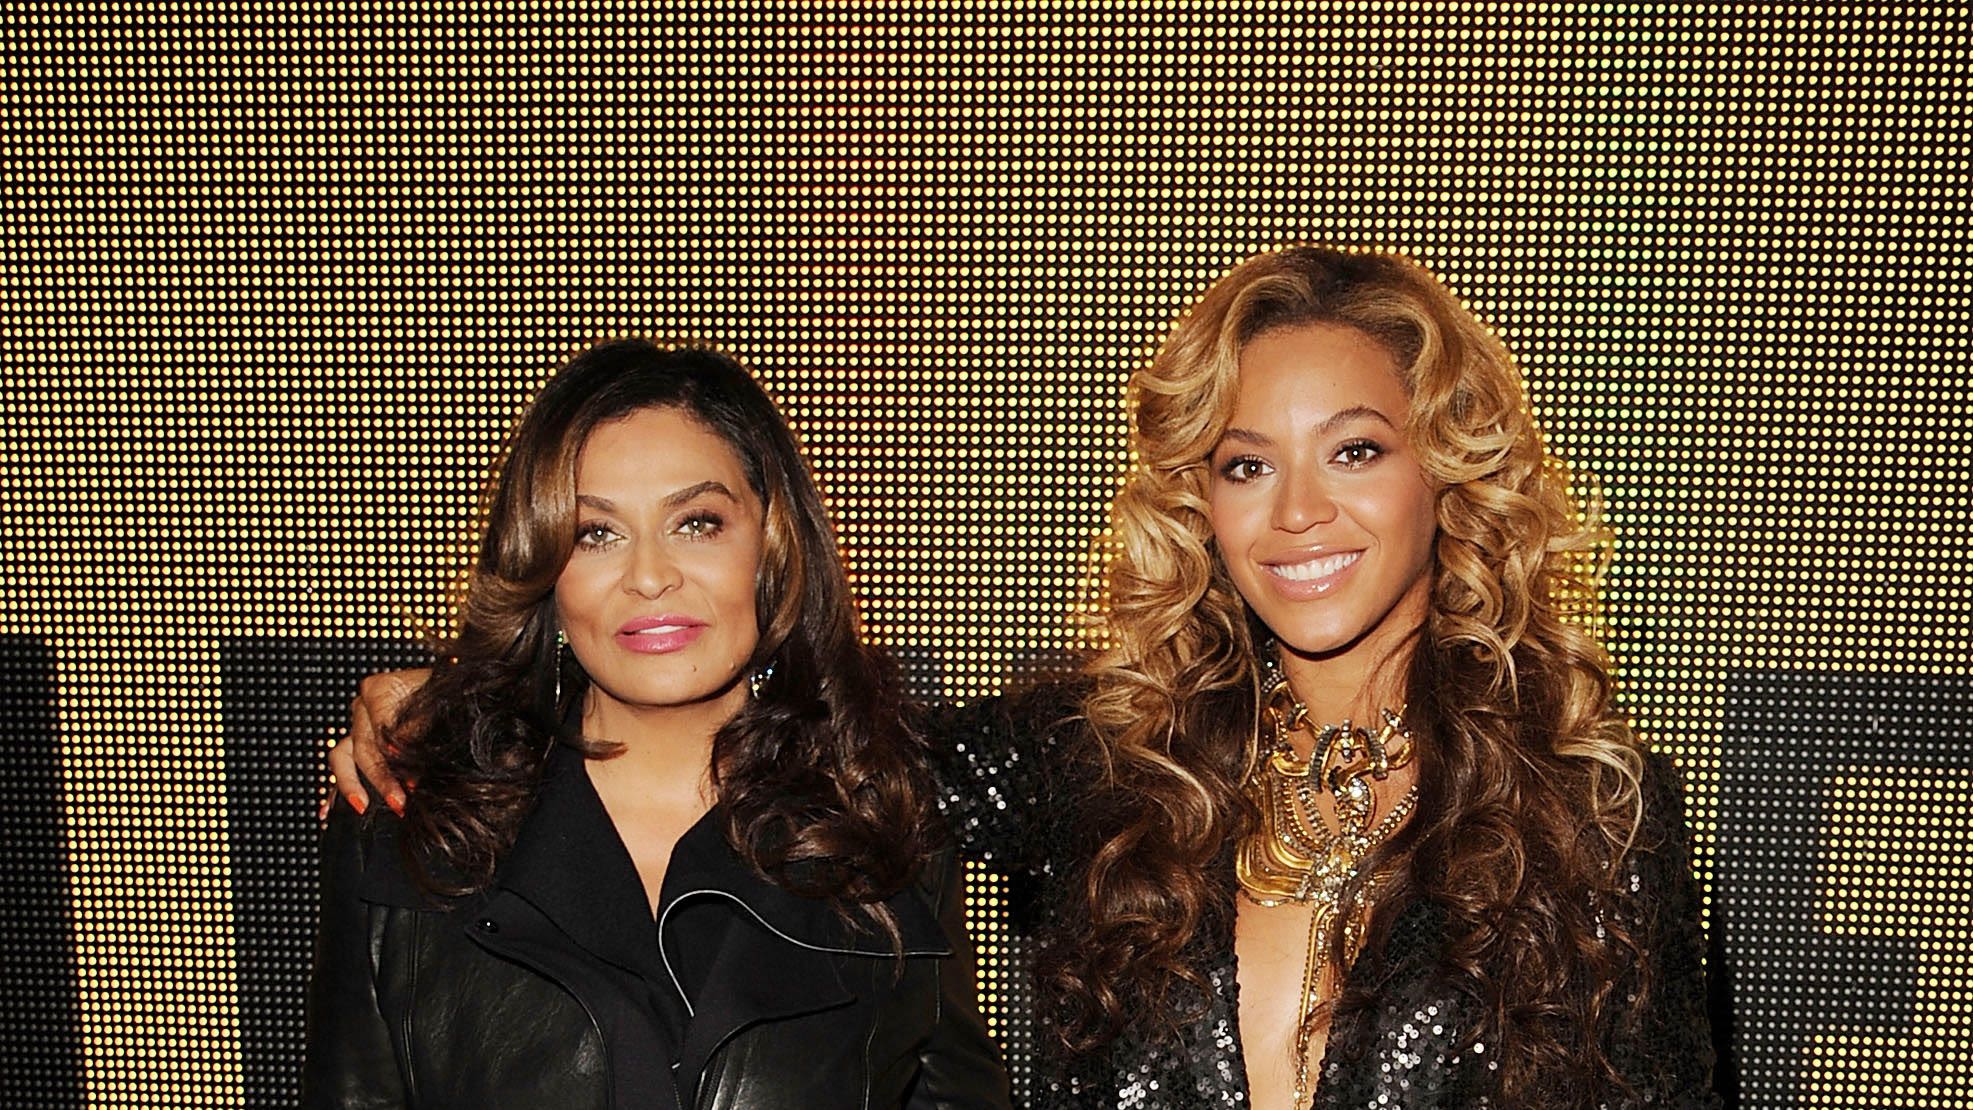 Tina Knowles Shares Rare Details About Beyoncé’s Six-Year-Old Twins, Rumi and Sir